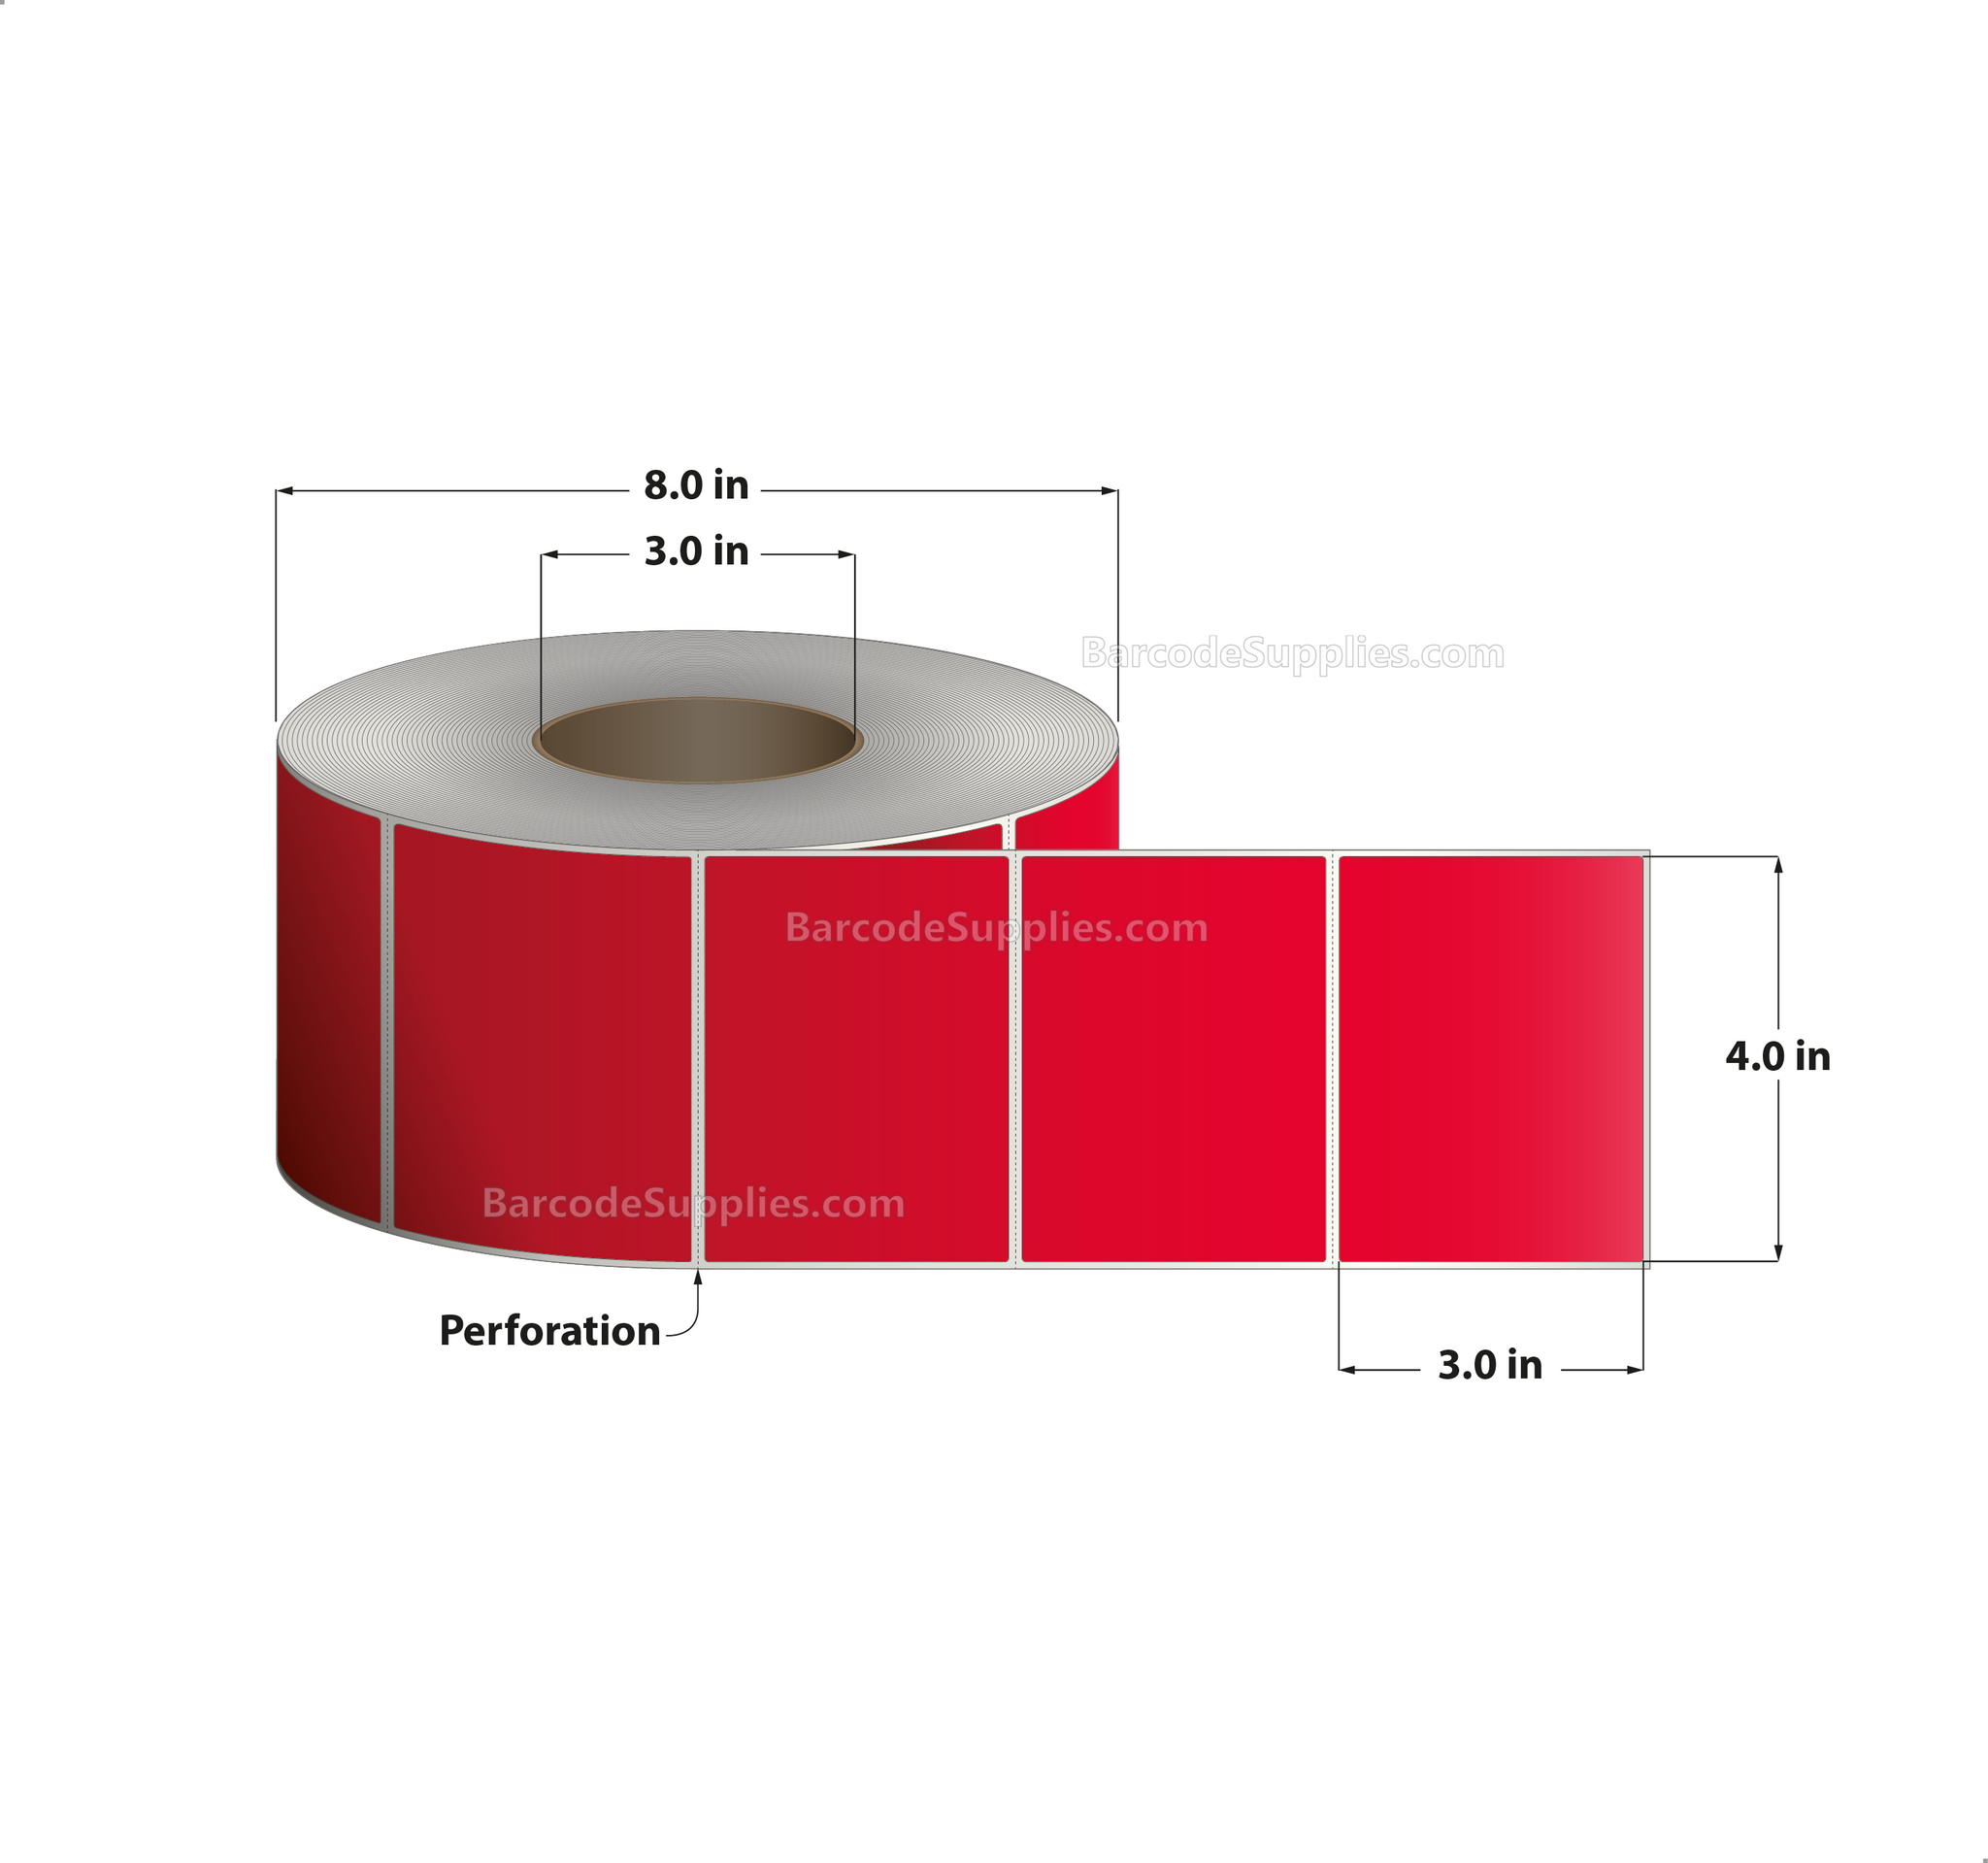 Products 4 x 3 Thermal Transfer 032 Red Labels With Permanent Adhesive - Perforated - 1900 Labels Per Roll - Carton Of 4 Rolls - 7600 Labels Total - MPN: RFC-4-3-1900-RD